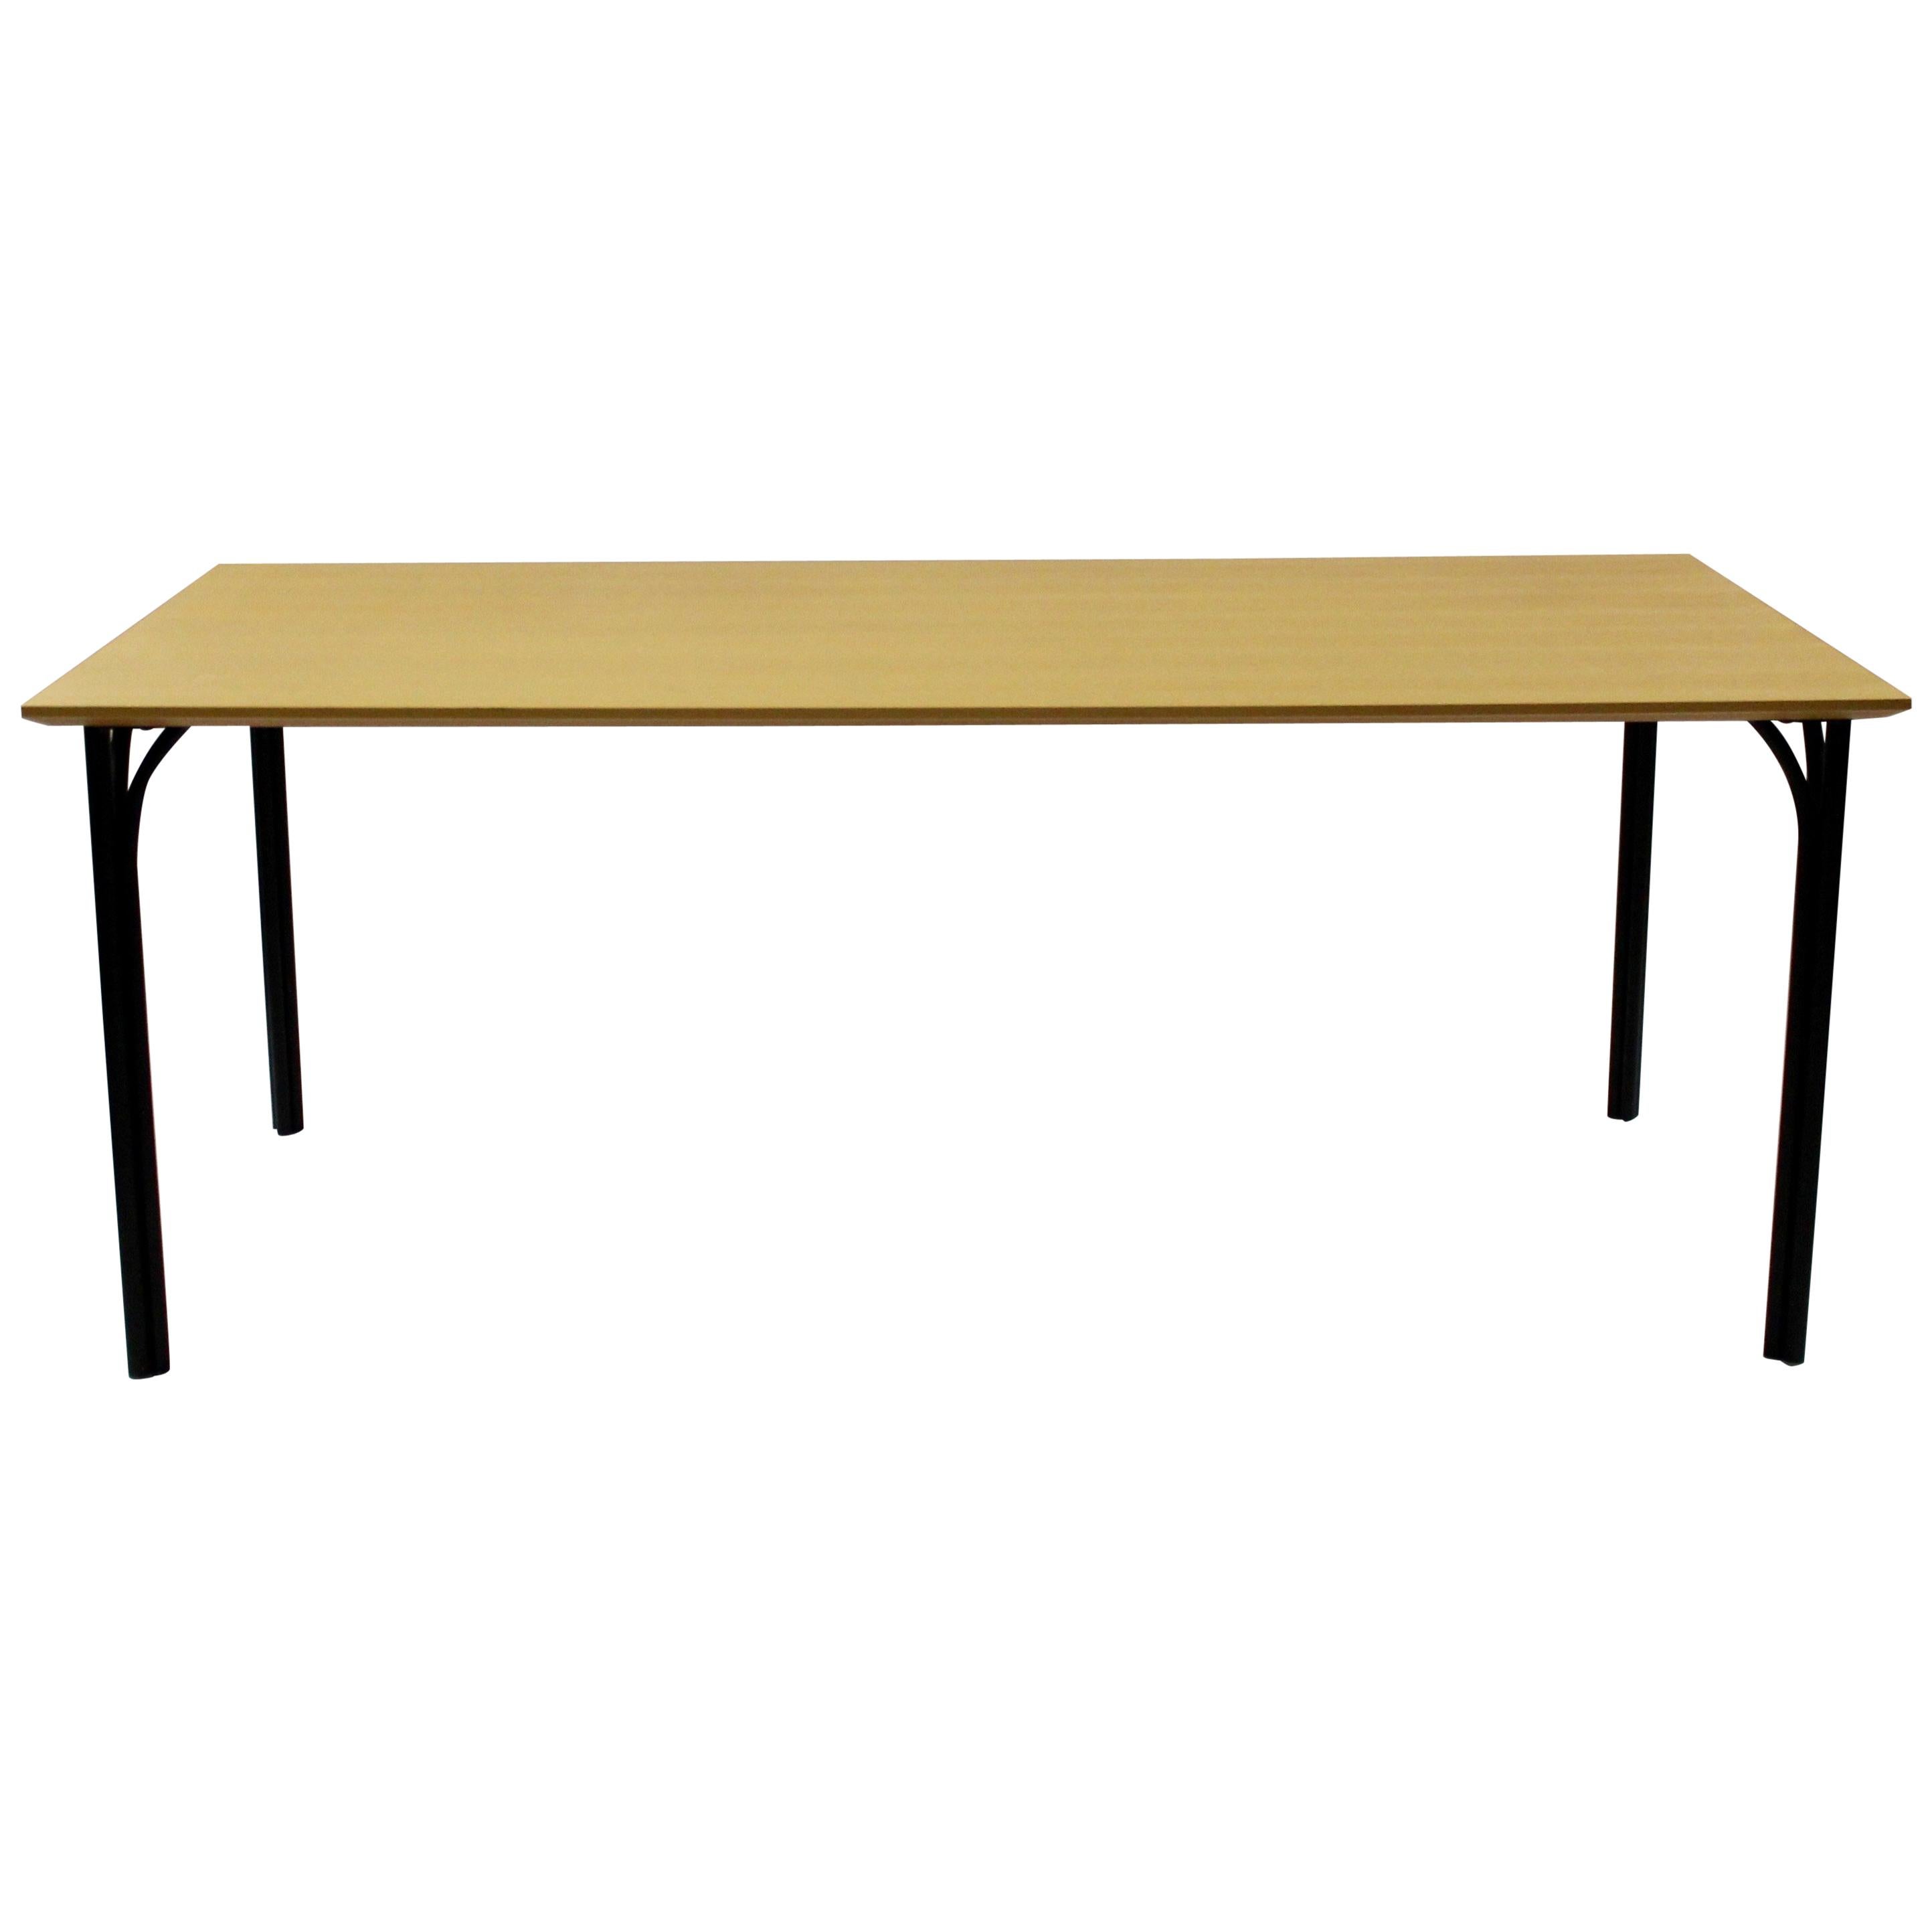 "Tobago" Dining Table, Model 8116 by Nanna Ditzel and Fredericia Furniture